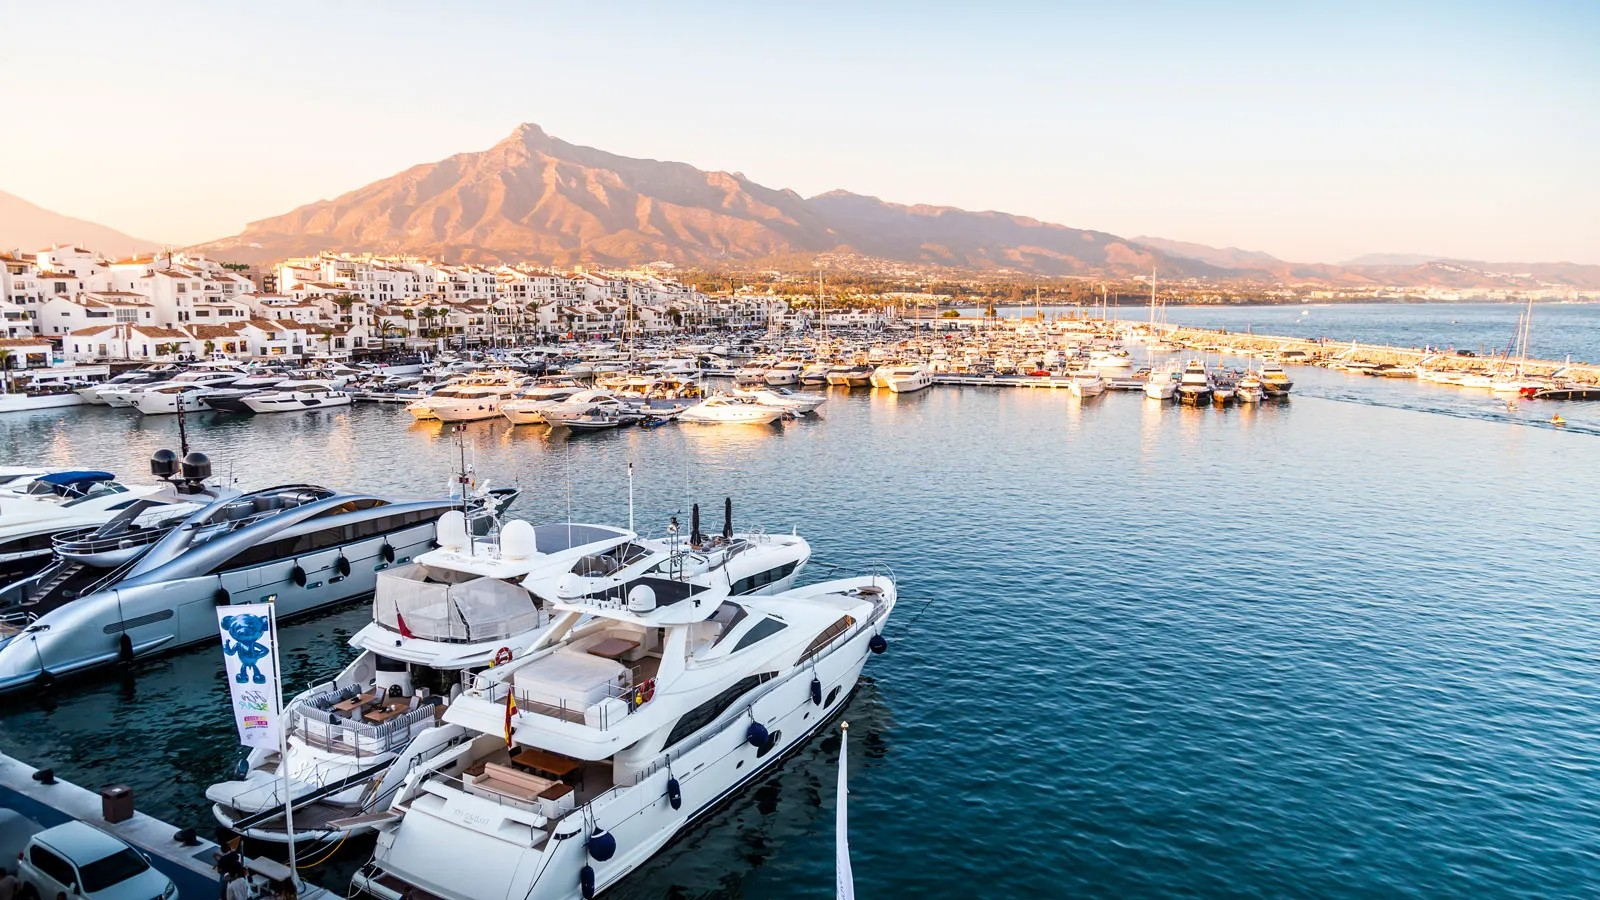 E1, the first all electric boat race in Puerto Banús